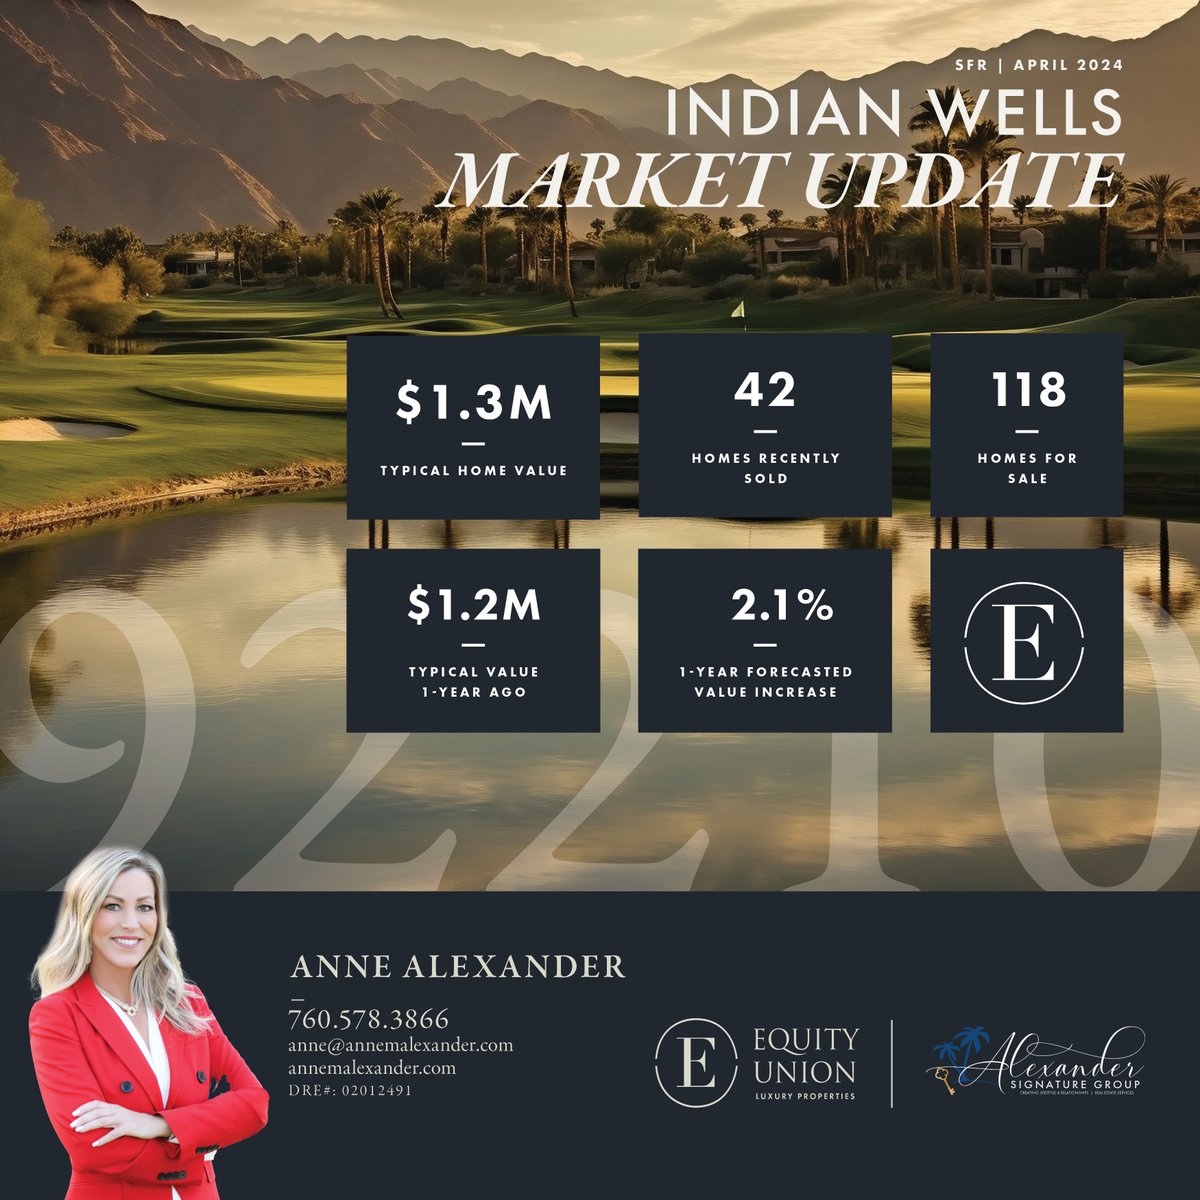 Check this latest Market Report for Indian Wells!
Don't miss out! 📷the market is changing. Our report gives you the information you need to make better decisions.
#IndianWellsMarketReport #StayAheadOfTheCurve #EquityUnion📷📷 #Alexandersignaturegroup